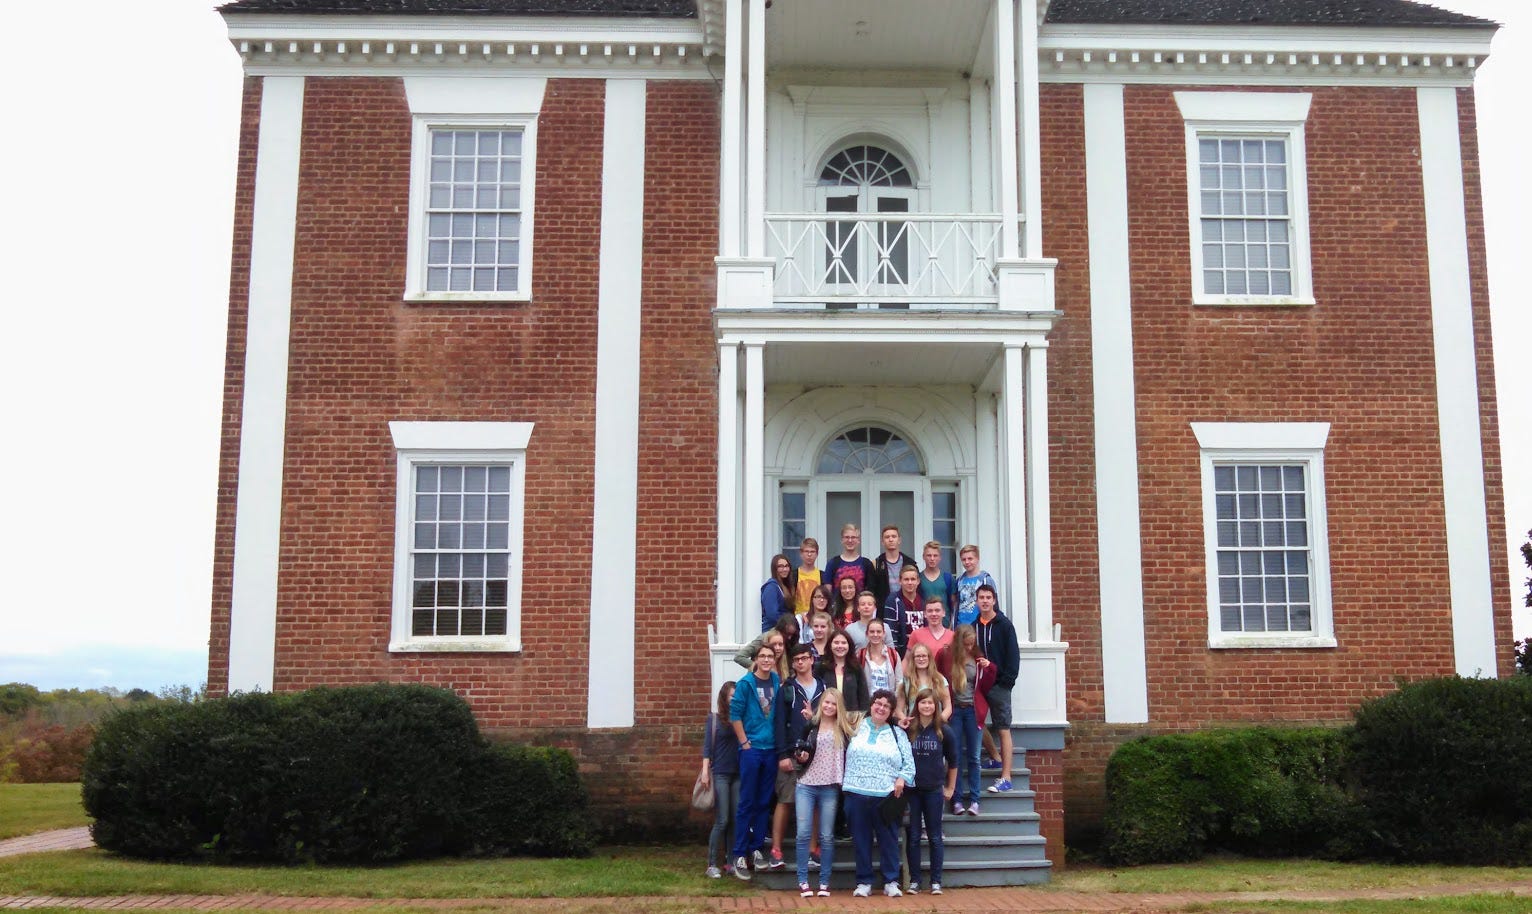 Group on steps of large antebellum house